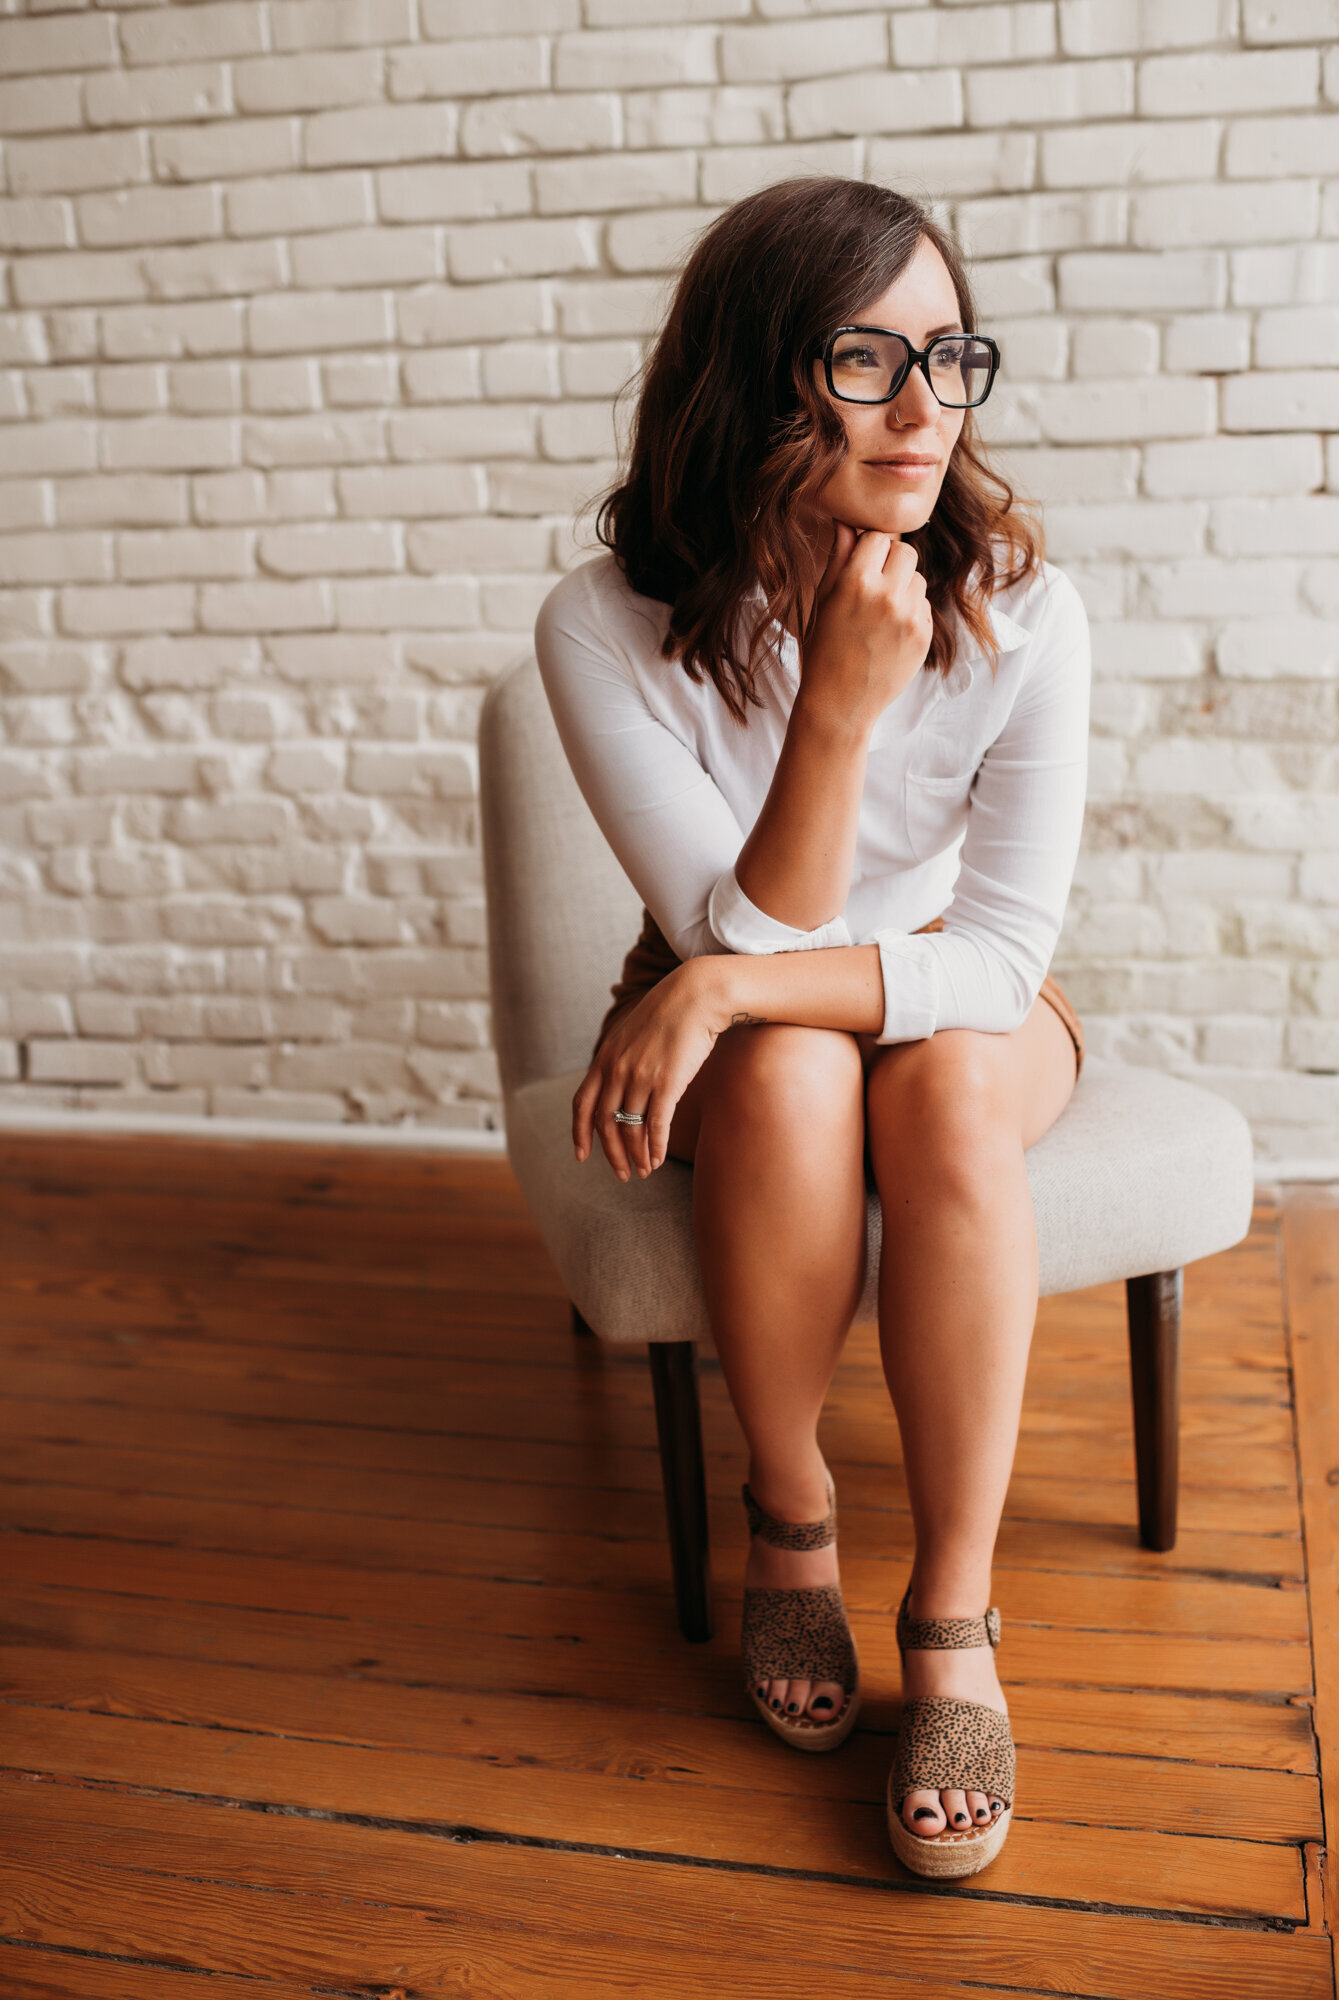 Branding Photographer, a woman with glasses sits in a chair near a brick wall inside